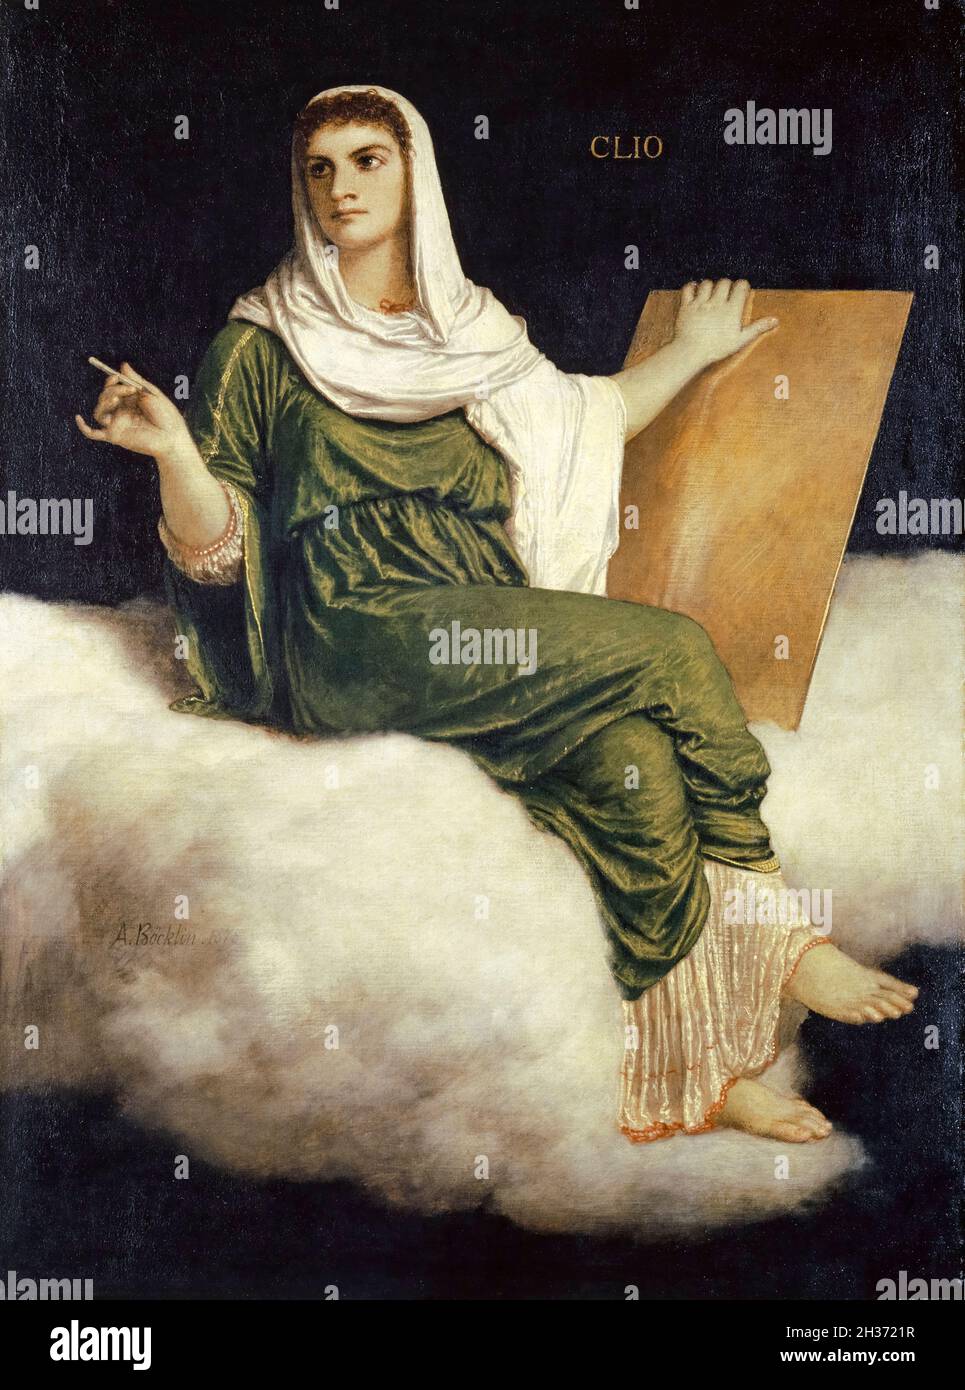 Arnold Bocklin, The Muse: Clio, painting, 1875 Stock Photo